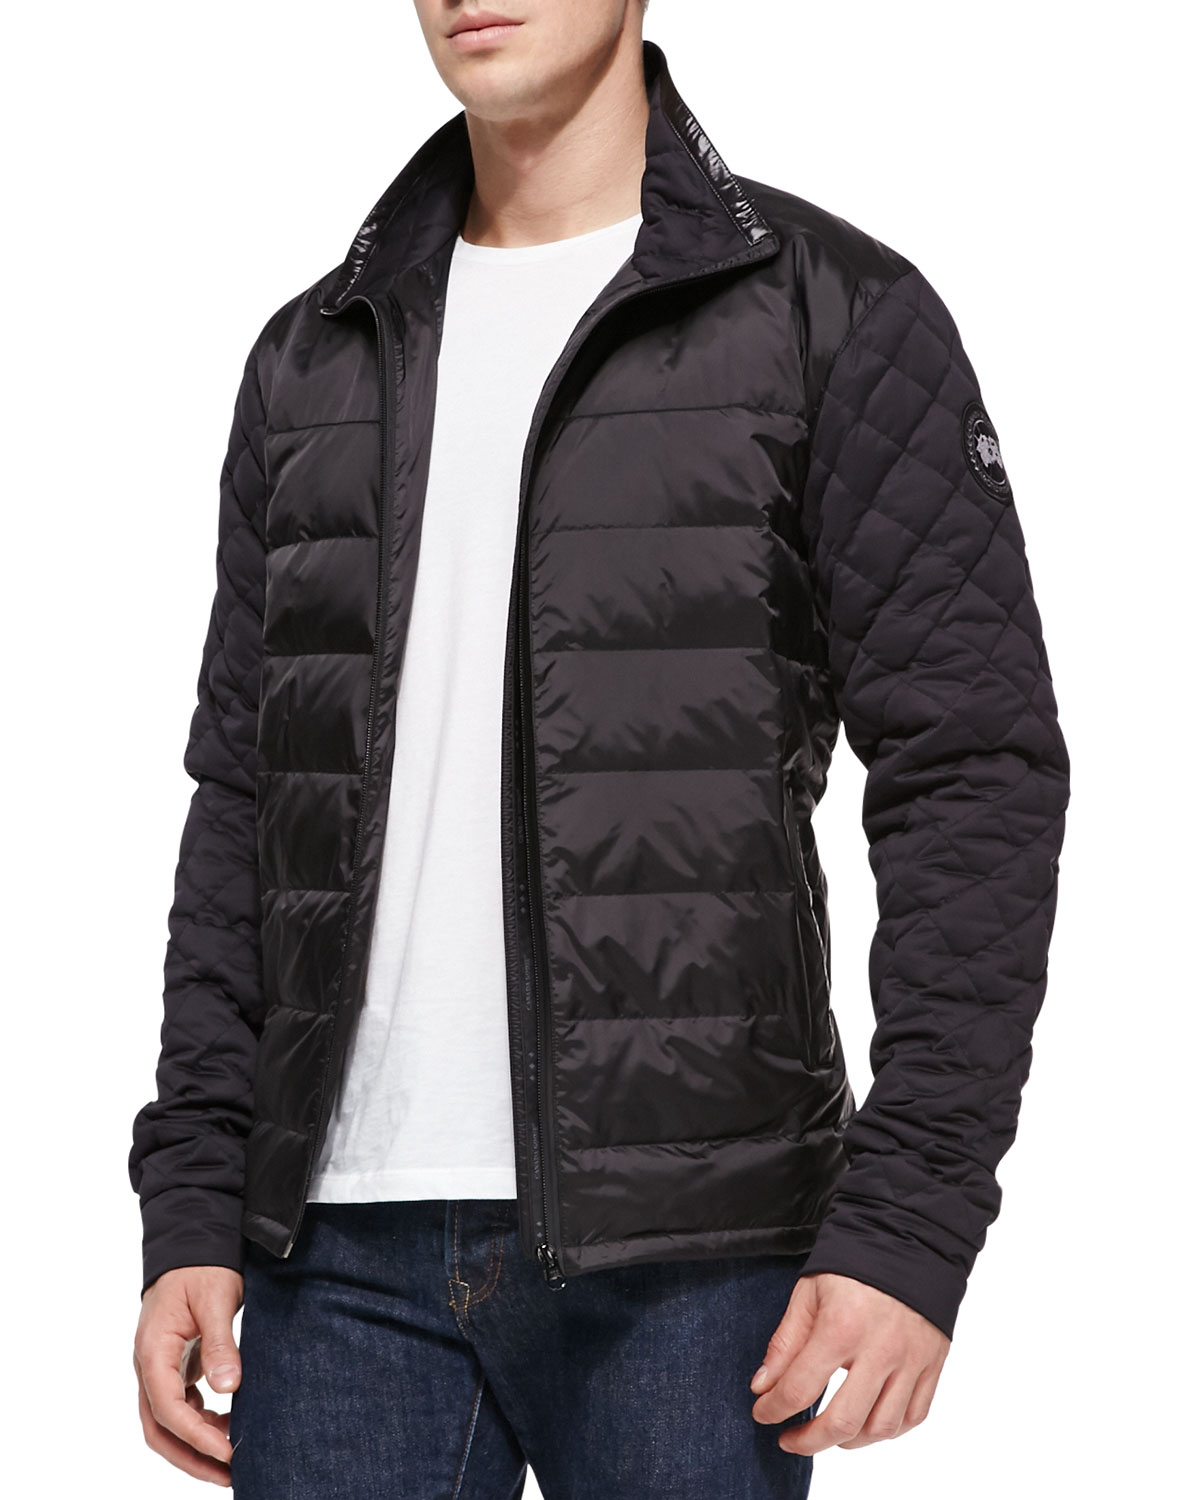 Canada Goose chateau parka online authentic - New Style Canada Goose Trillium Niagara Grape Clearance For Sale